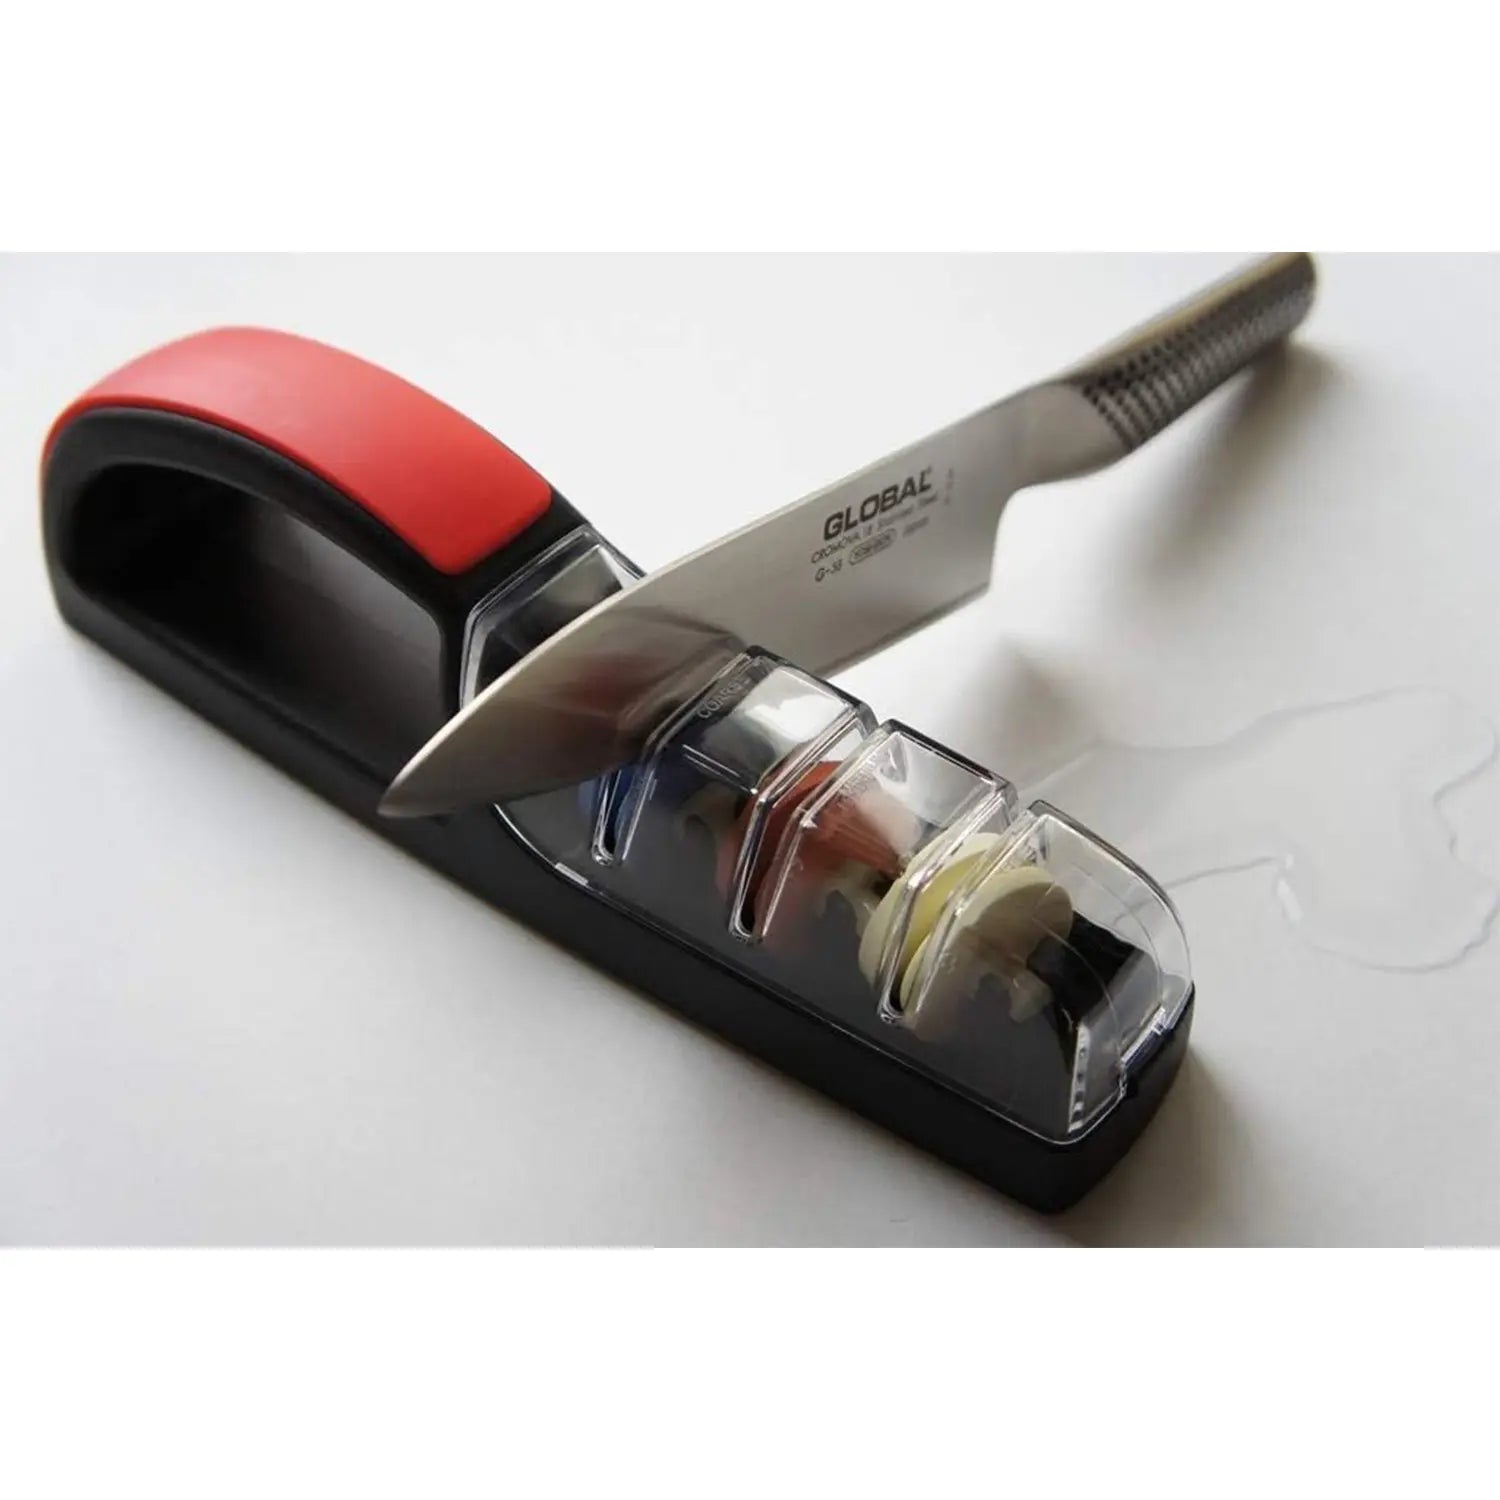 Global Speed Sharpener GSS-01 - Discovery Japan Mall